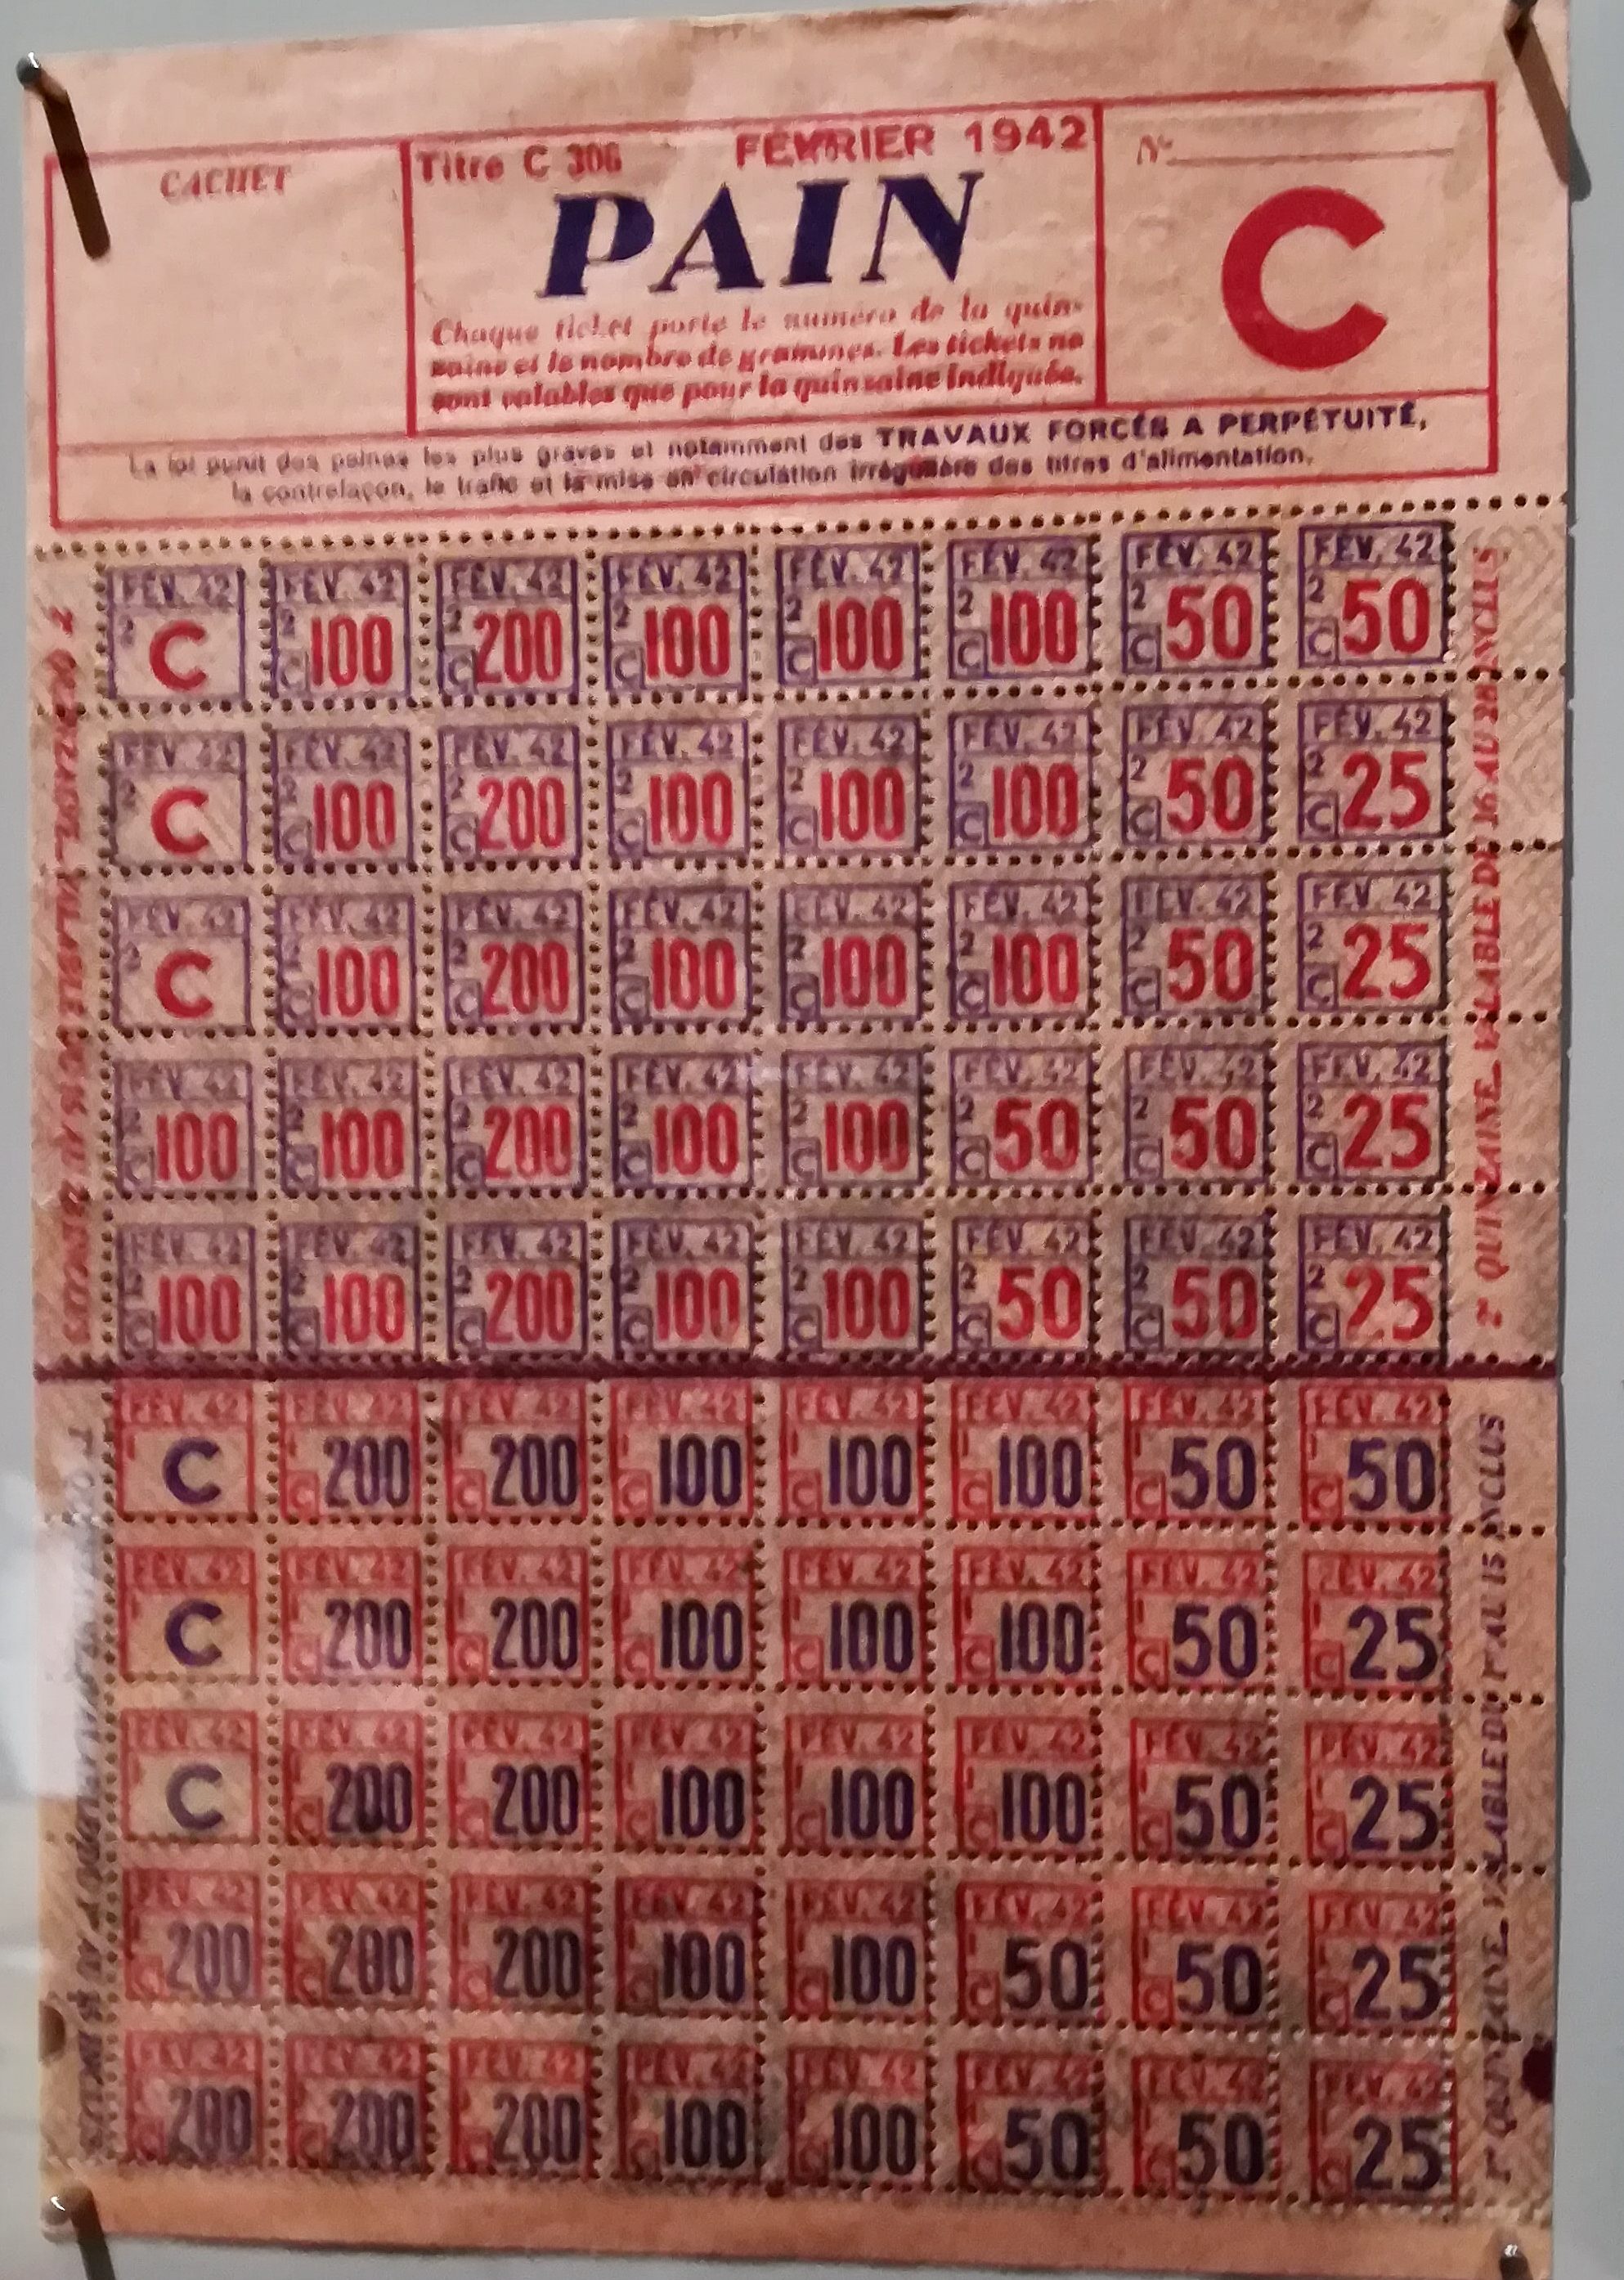 Food-rationing tickets were common in France during World War II.